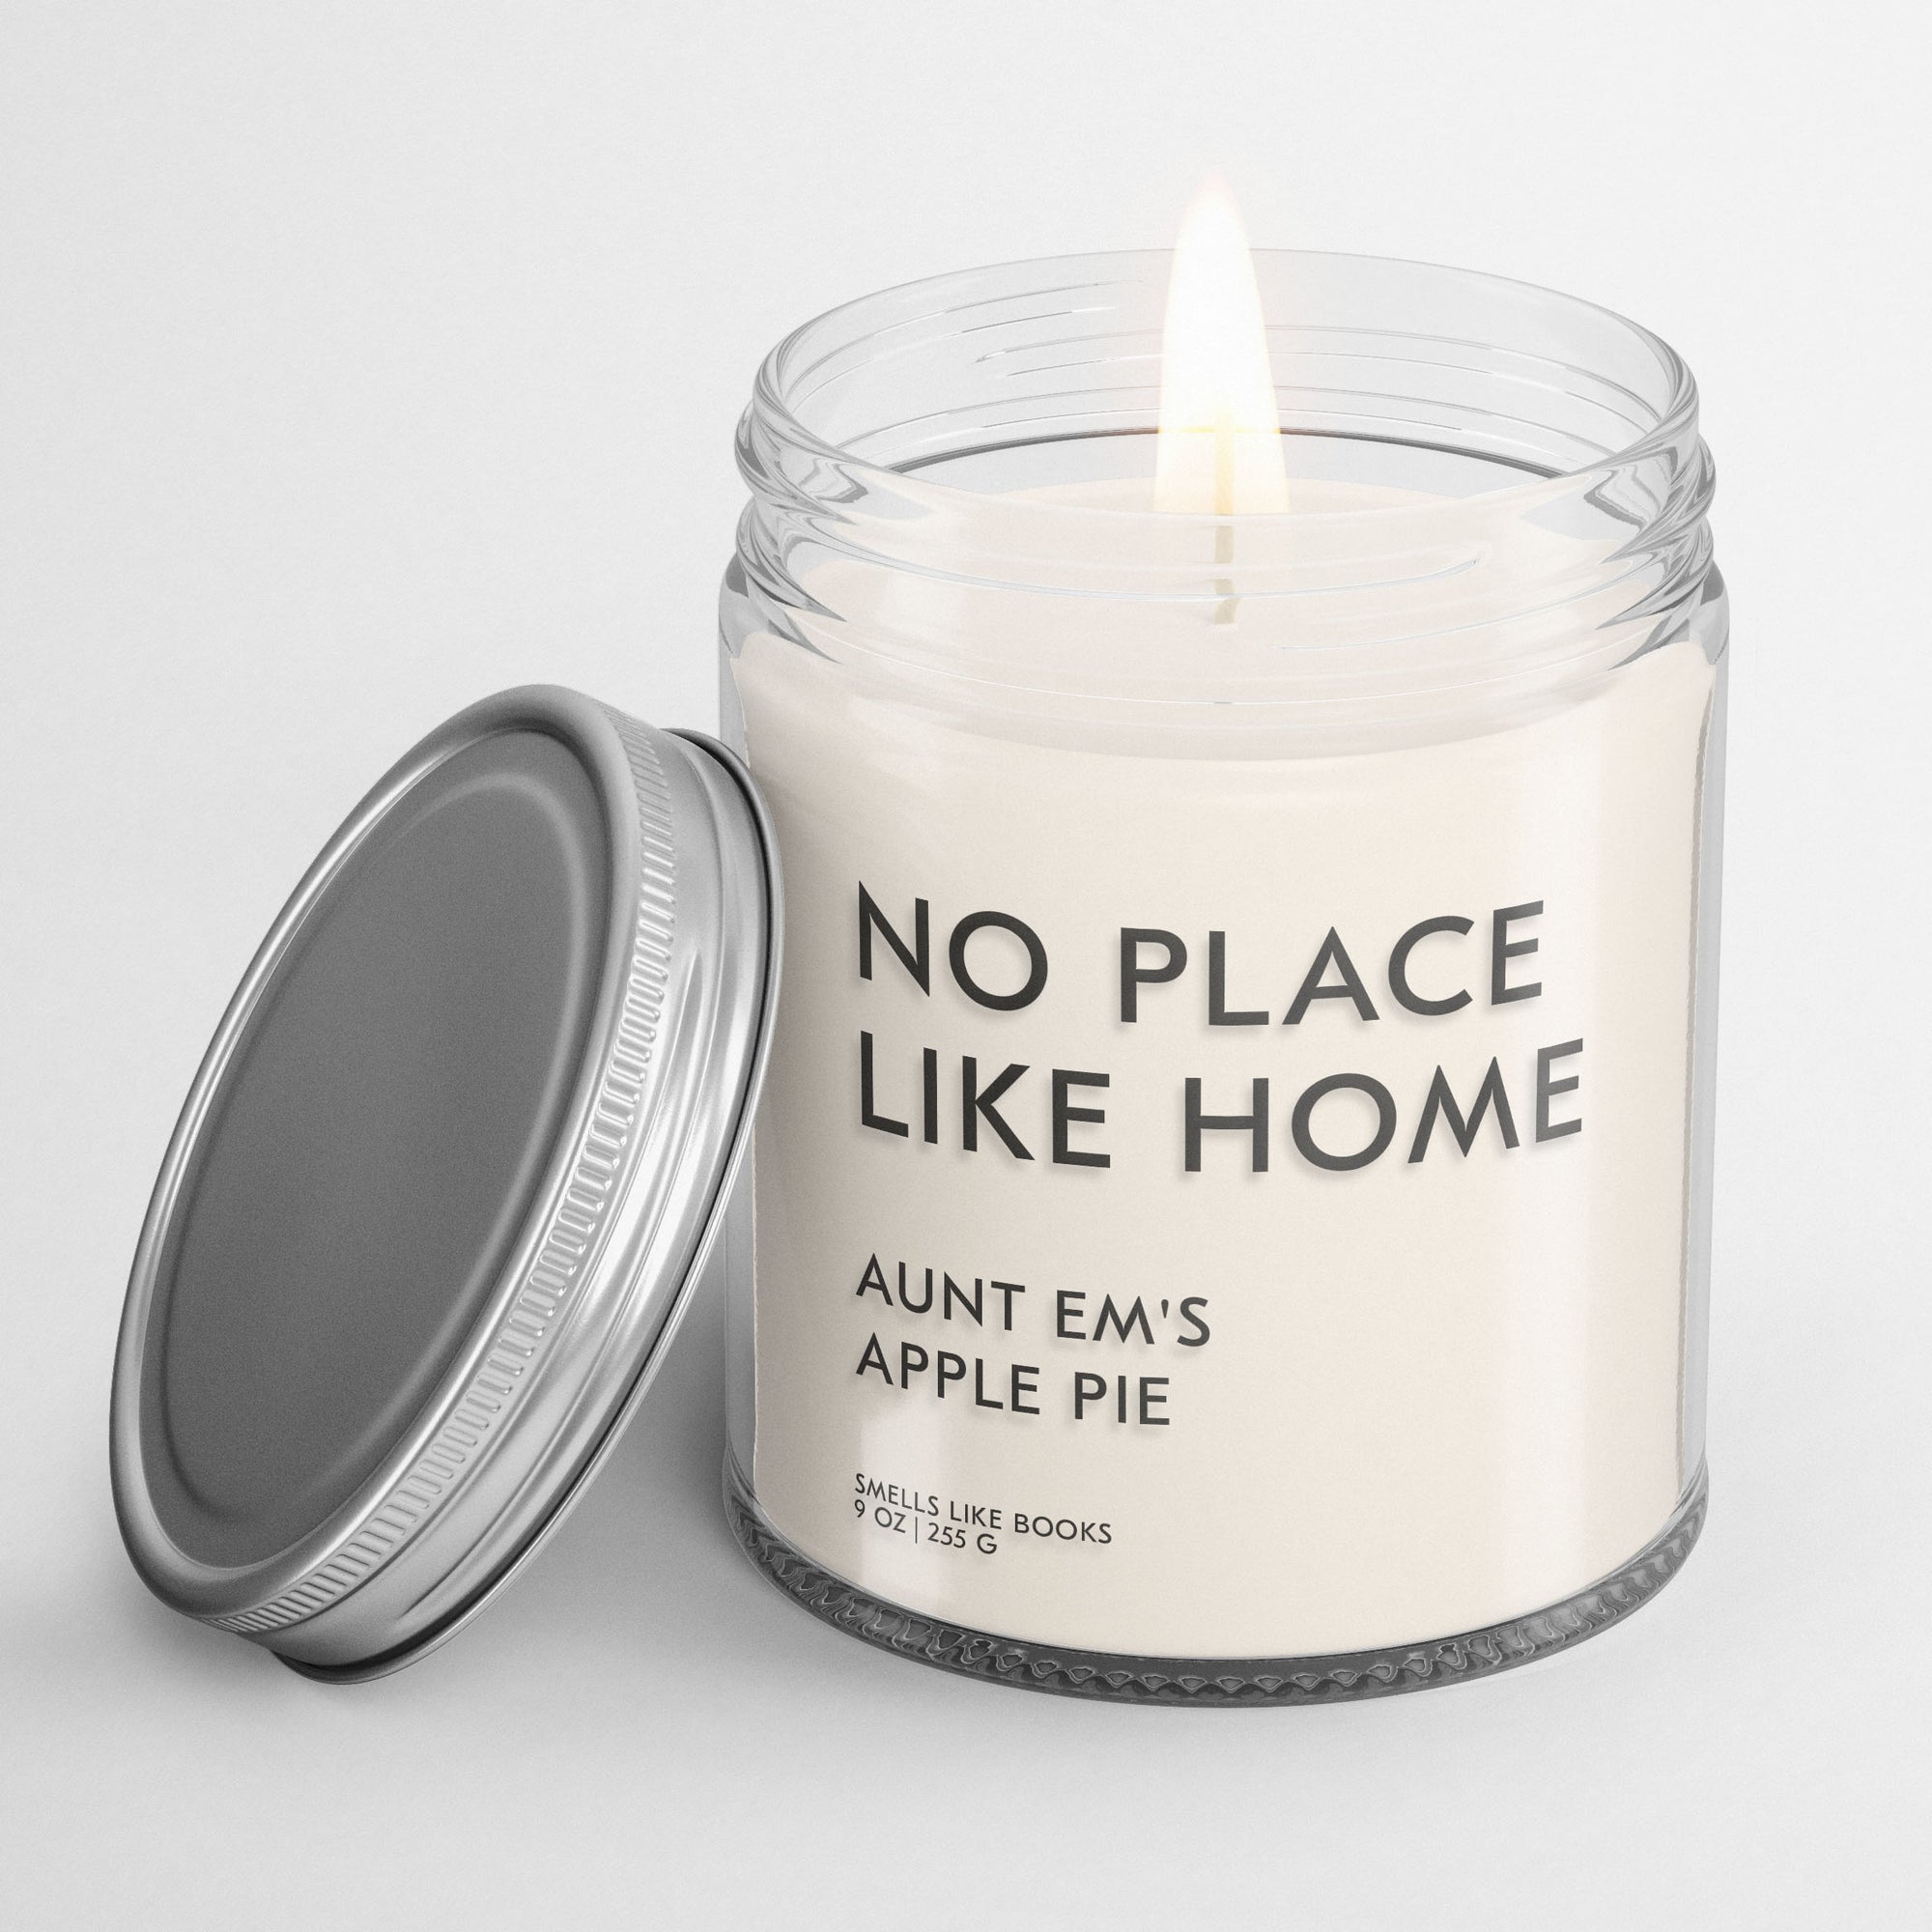 book inspired soy candle Smells Like Books NO PLACE LIKE HOME